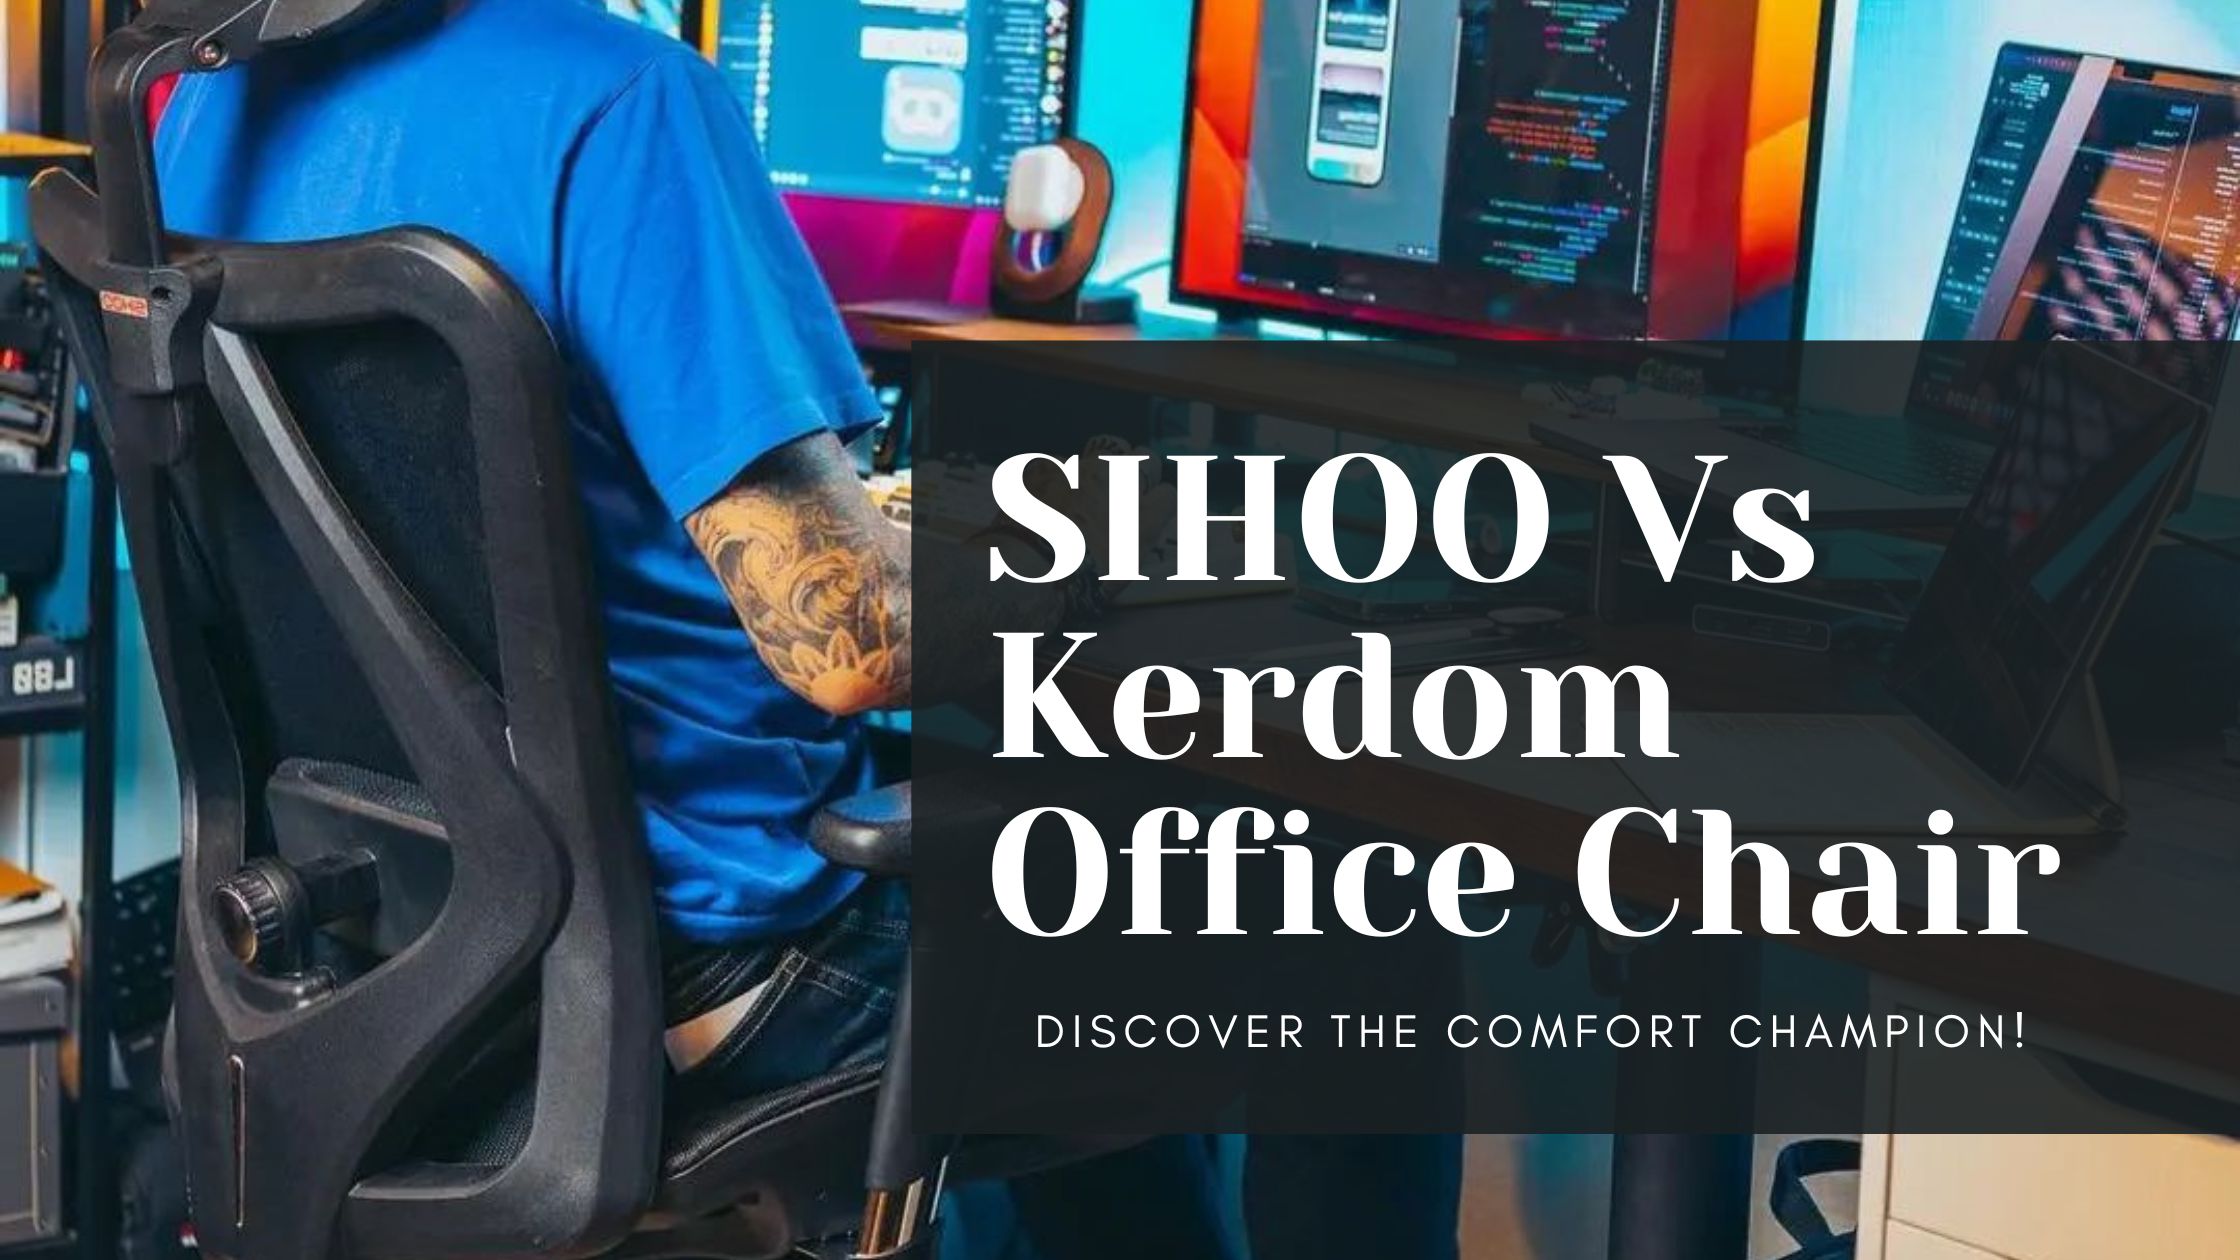 sihoo vs kerdom office chair tried and tested for several weeks